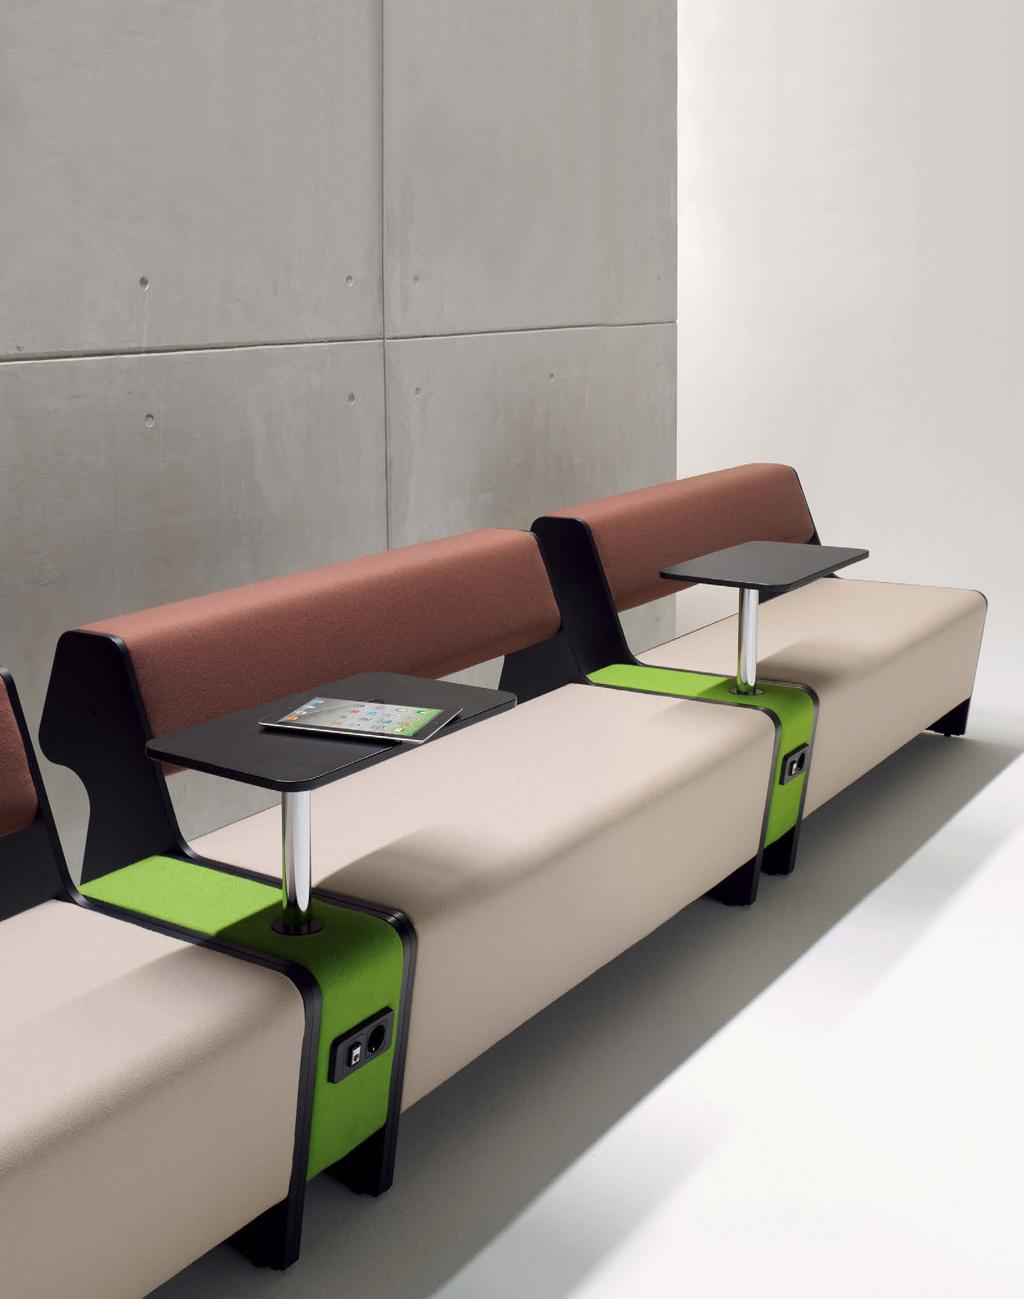 Modular Seating SySteMS Modułowe SySteMy SiedziSk Modulární SyStéMy Sedadel MagneS ii EN The modernised Magnes seating system has not only an improved form but also a number of new functionalities.